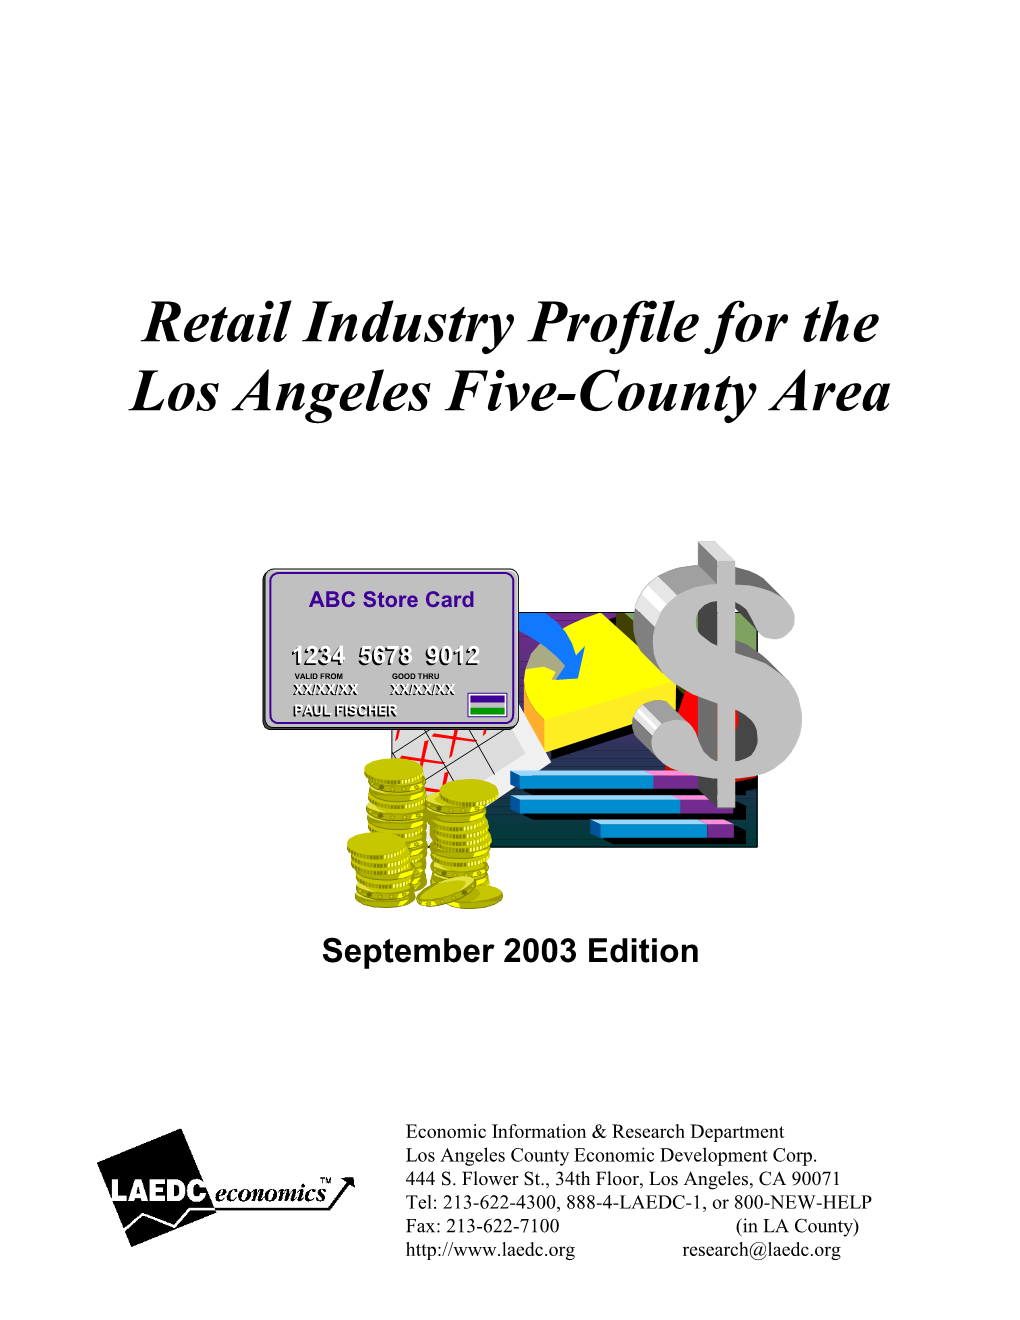 Retail Industry Profile, 2003